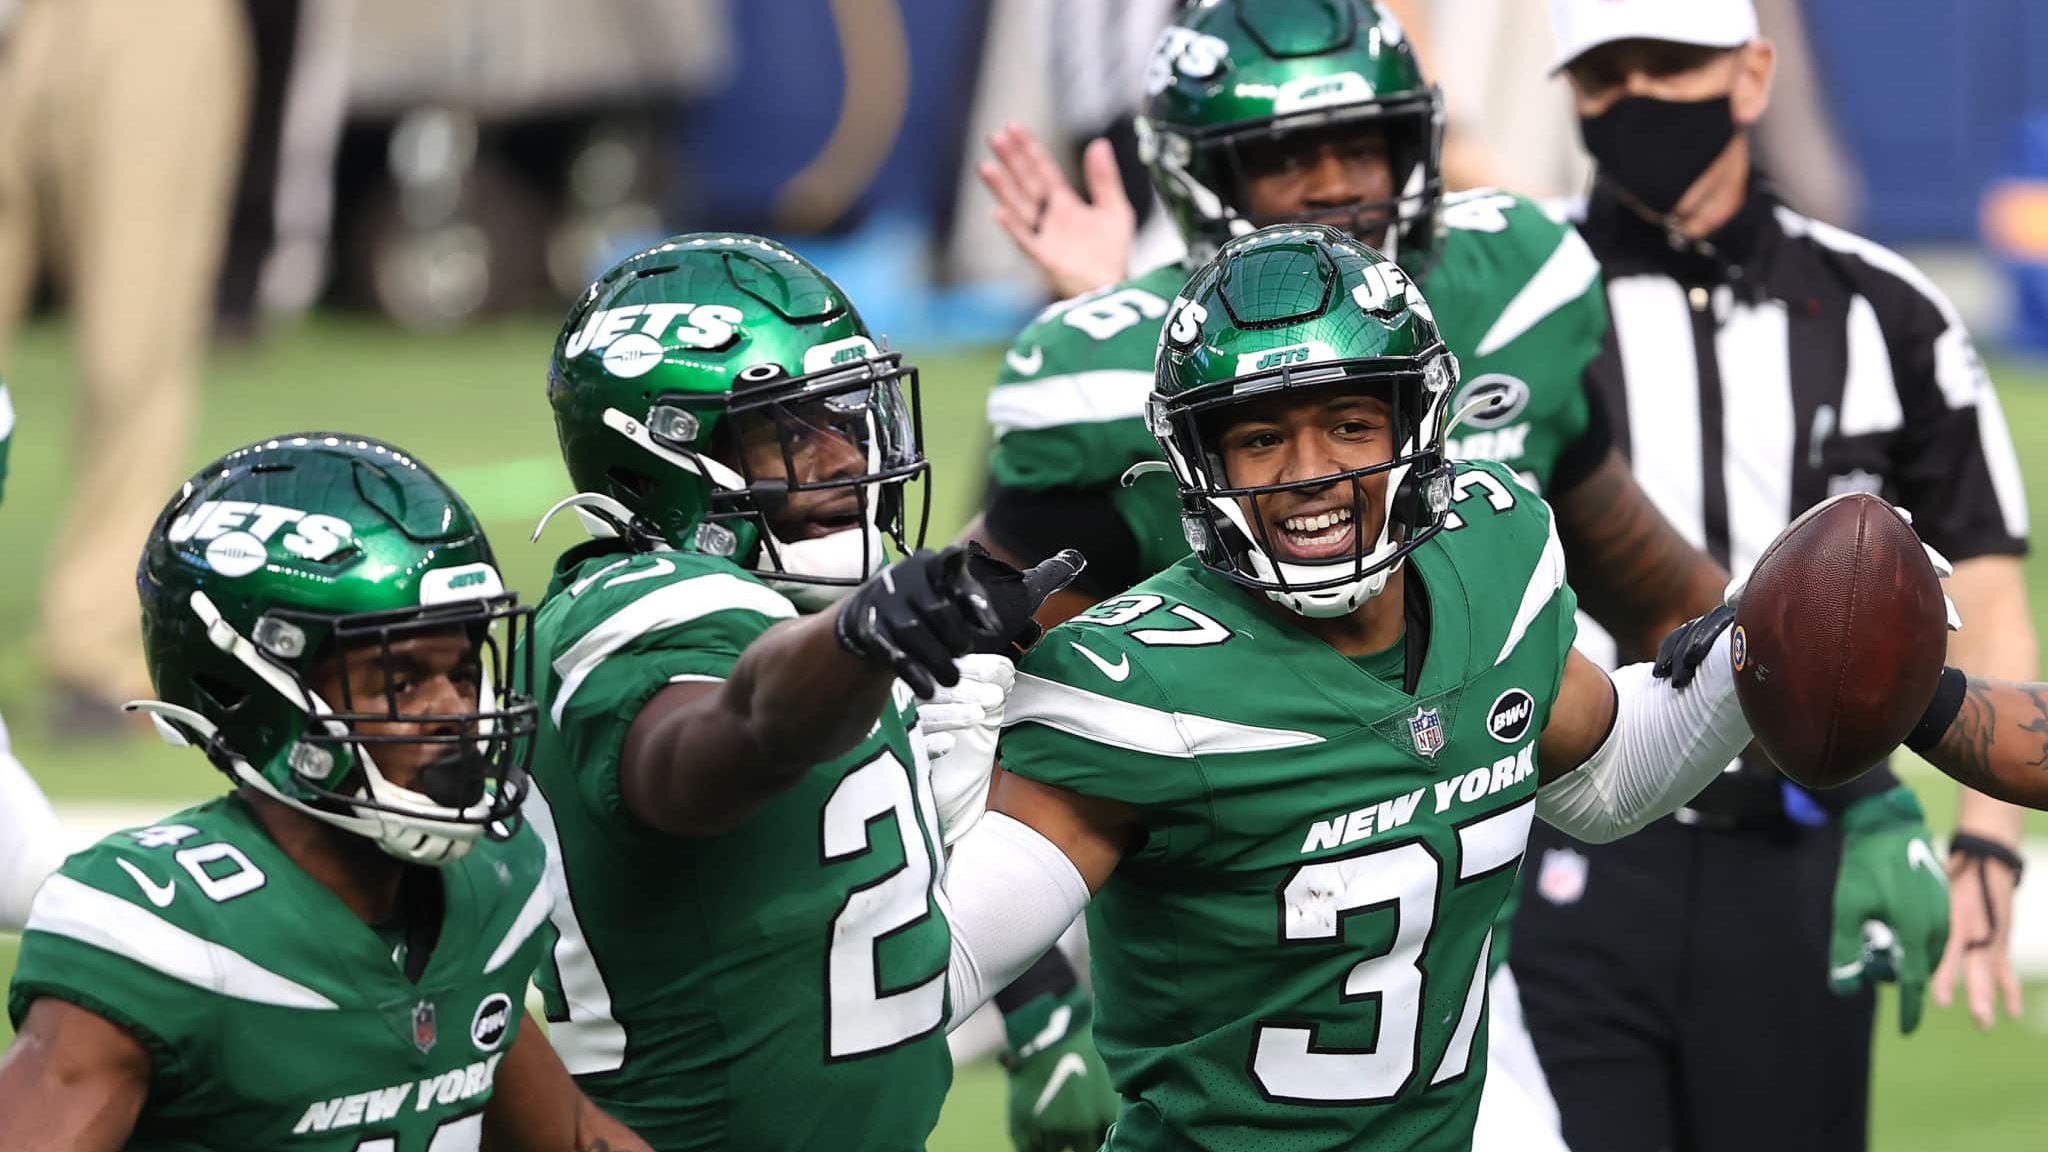 INGLEWOOD, CALIFORNIA - DECEMBER 20: Bryce Hall #37 of the New York Jets celebrates with teammates following an interception during the second quarter of a game against the Los Angeles Rams at SoFi Stadium on December 20, 2020 in Inglewood, California.